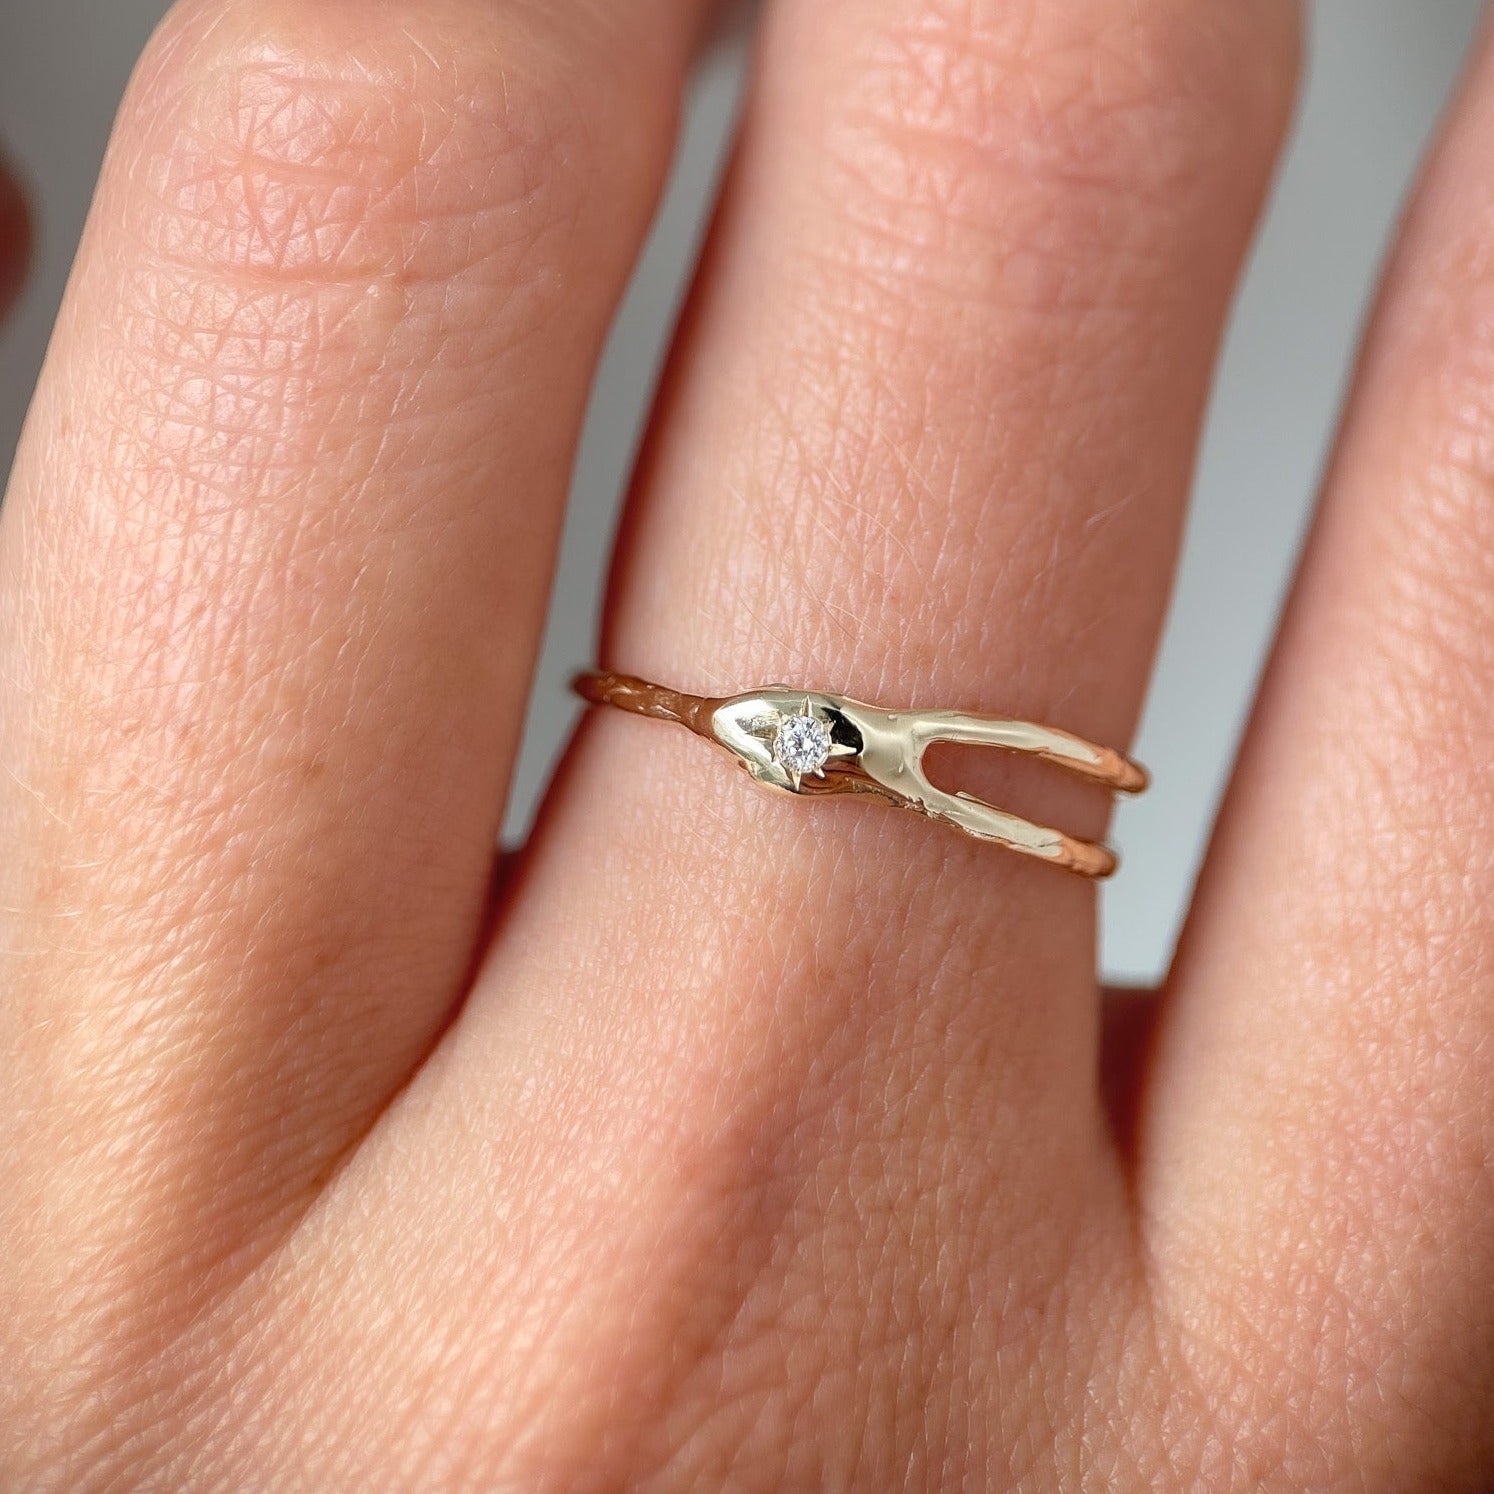 Asymmetrical gold ring with split band centered around a star-set diamond, resembling a shooting star for a unique and celestial design.